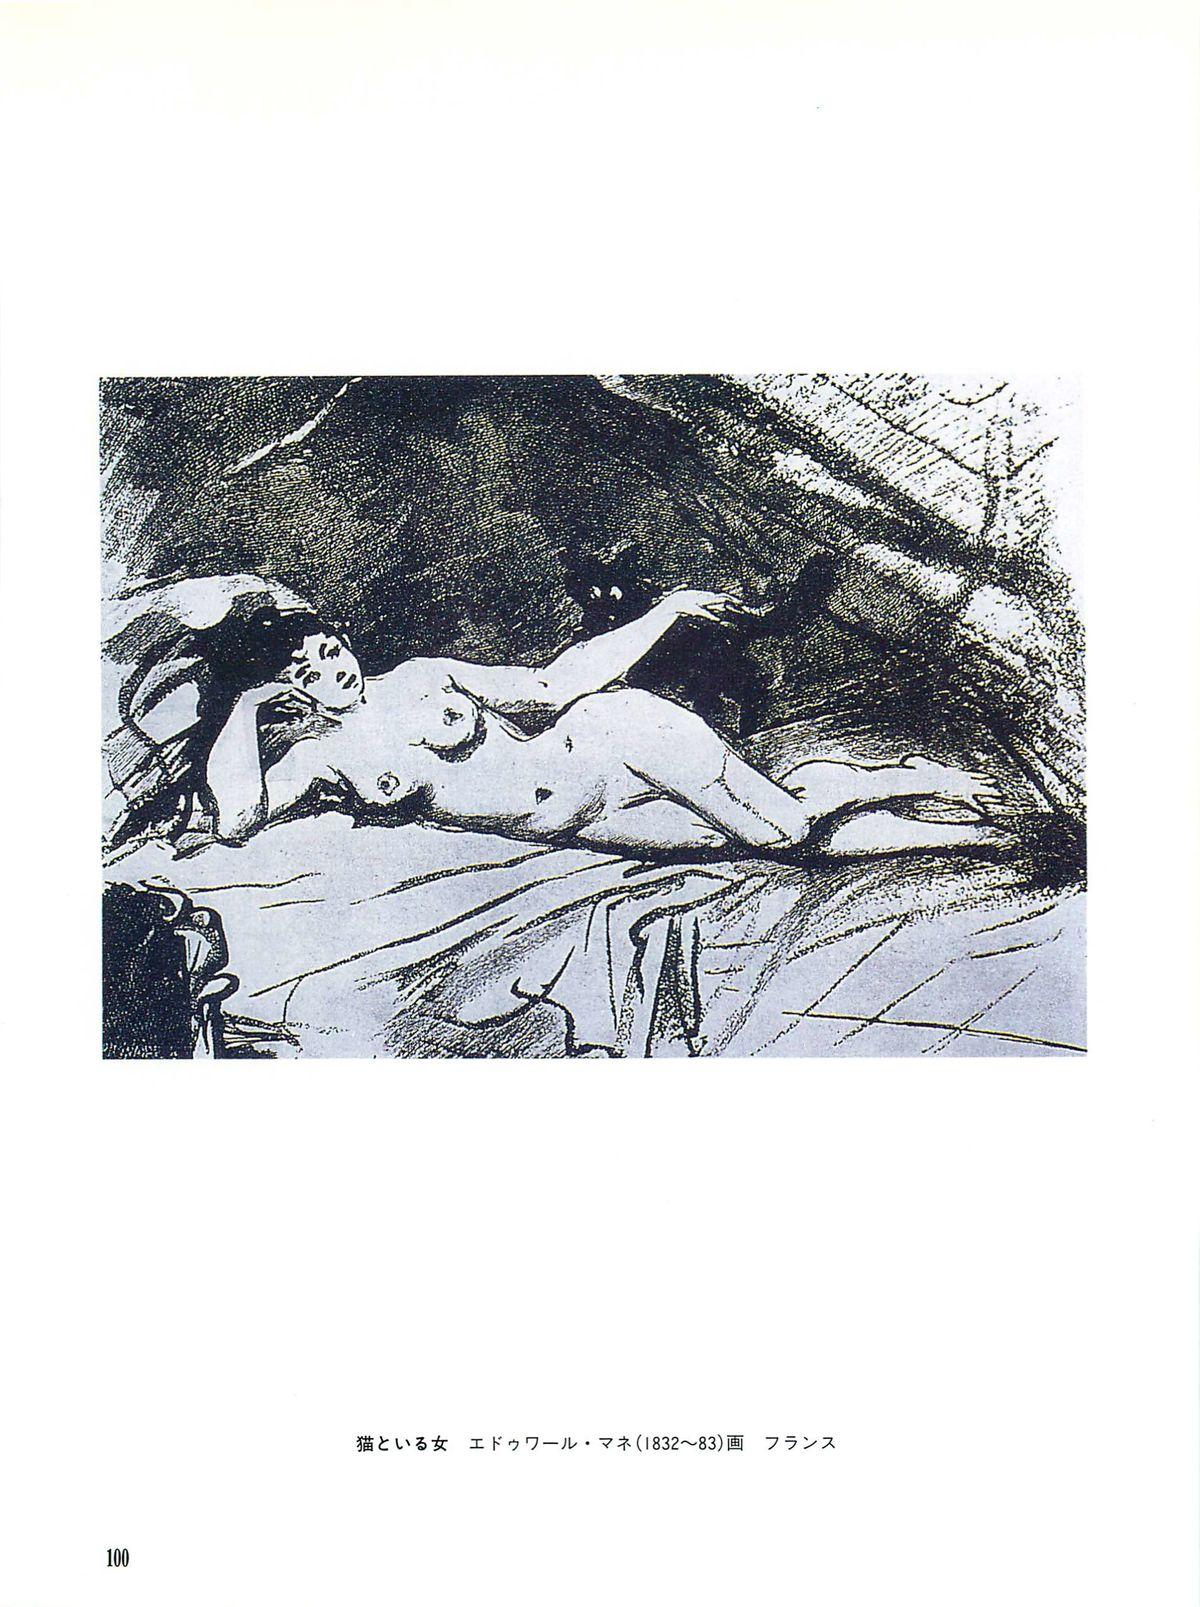 World of Eros: Erotic pieces of the masters 104